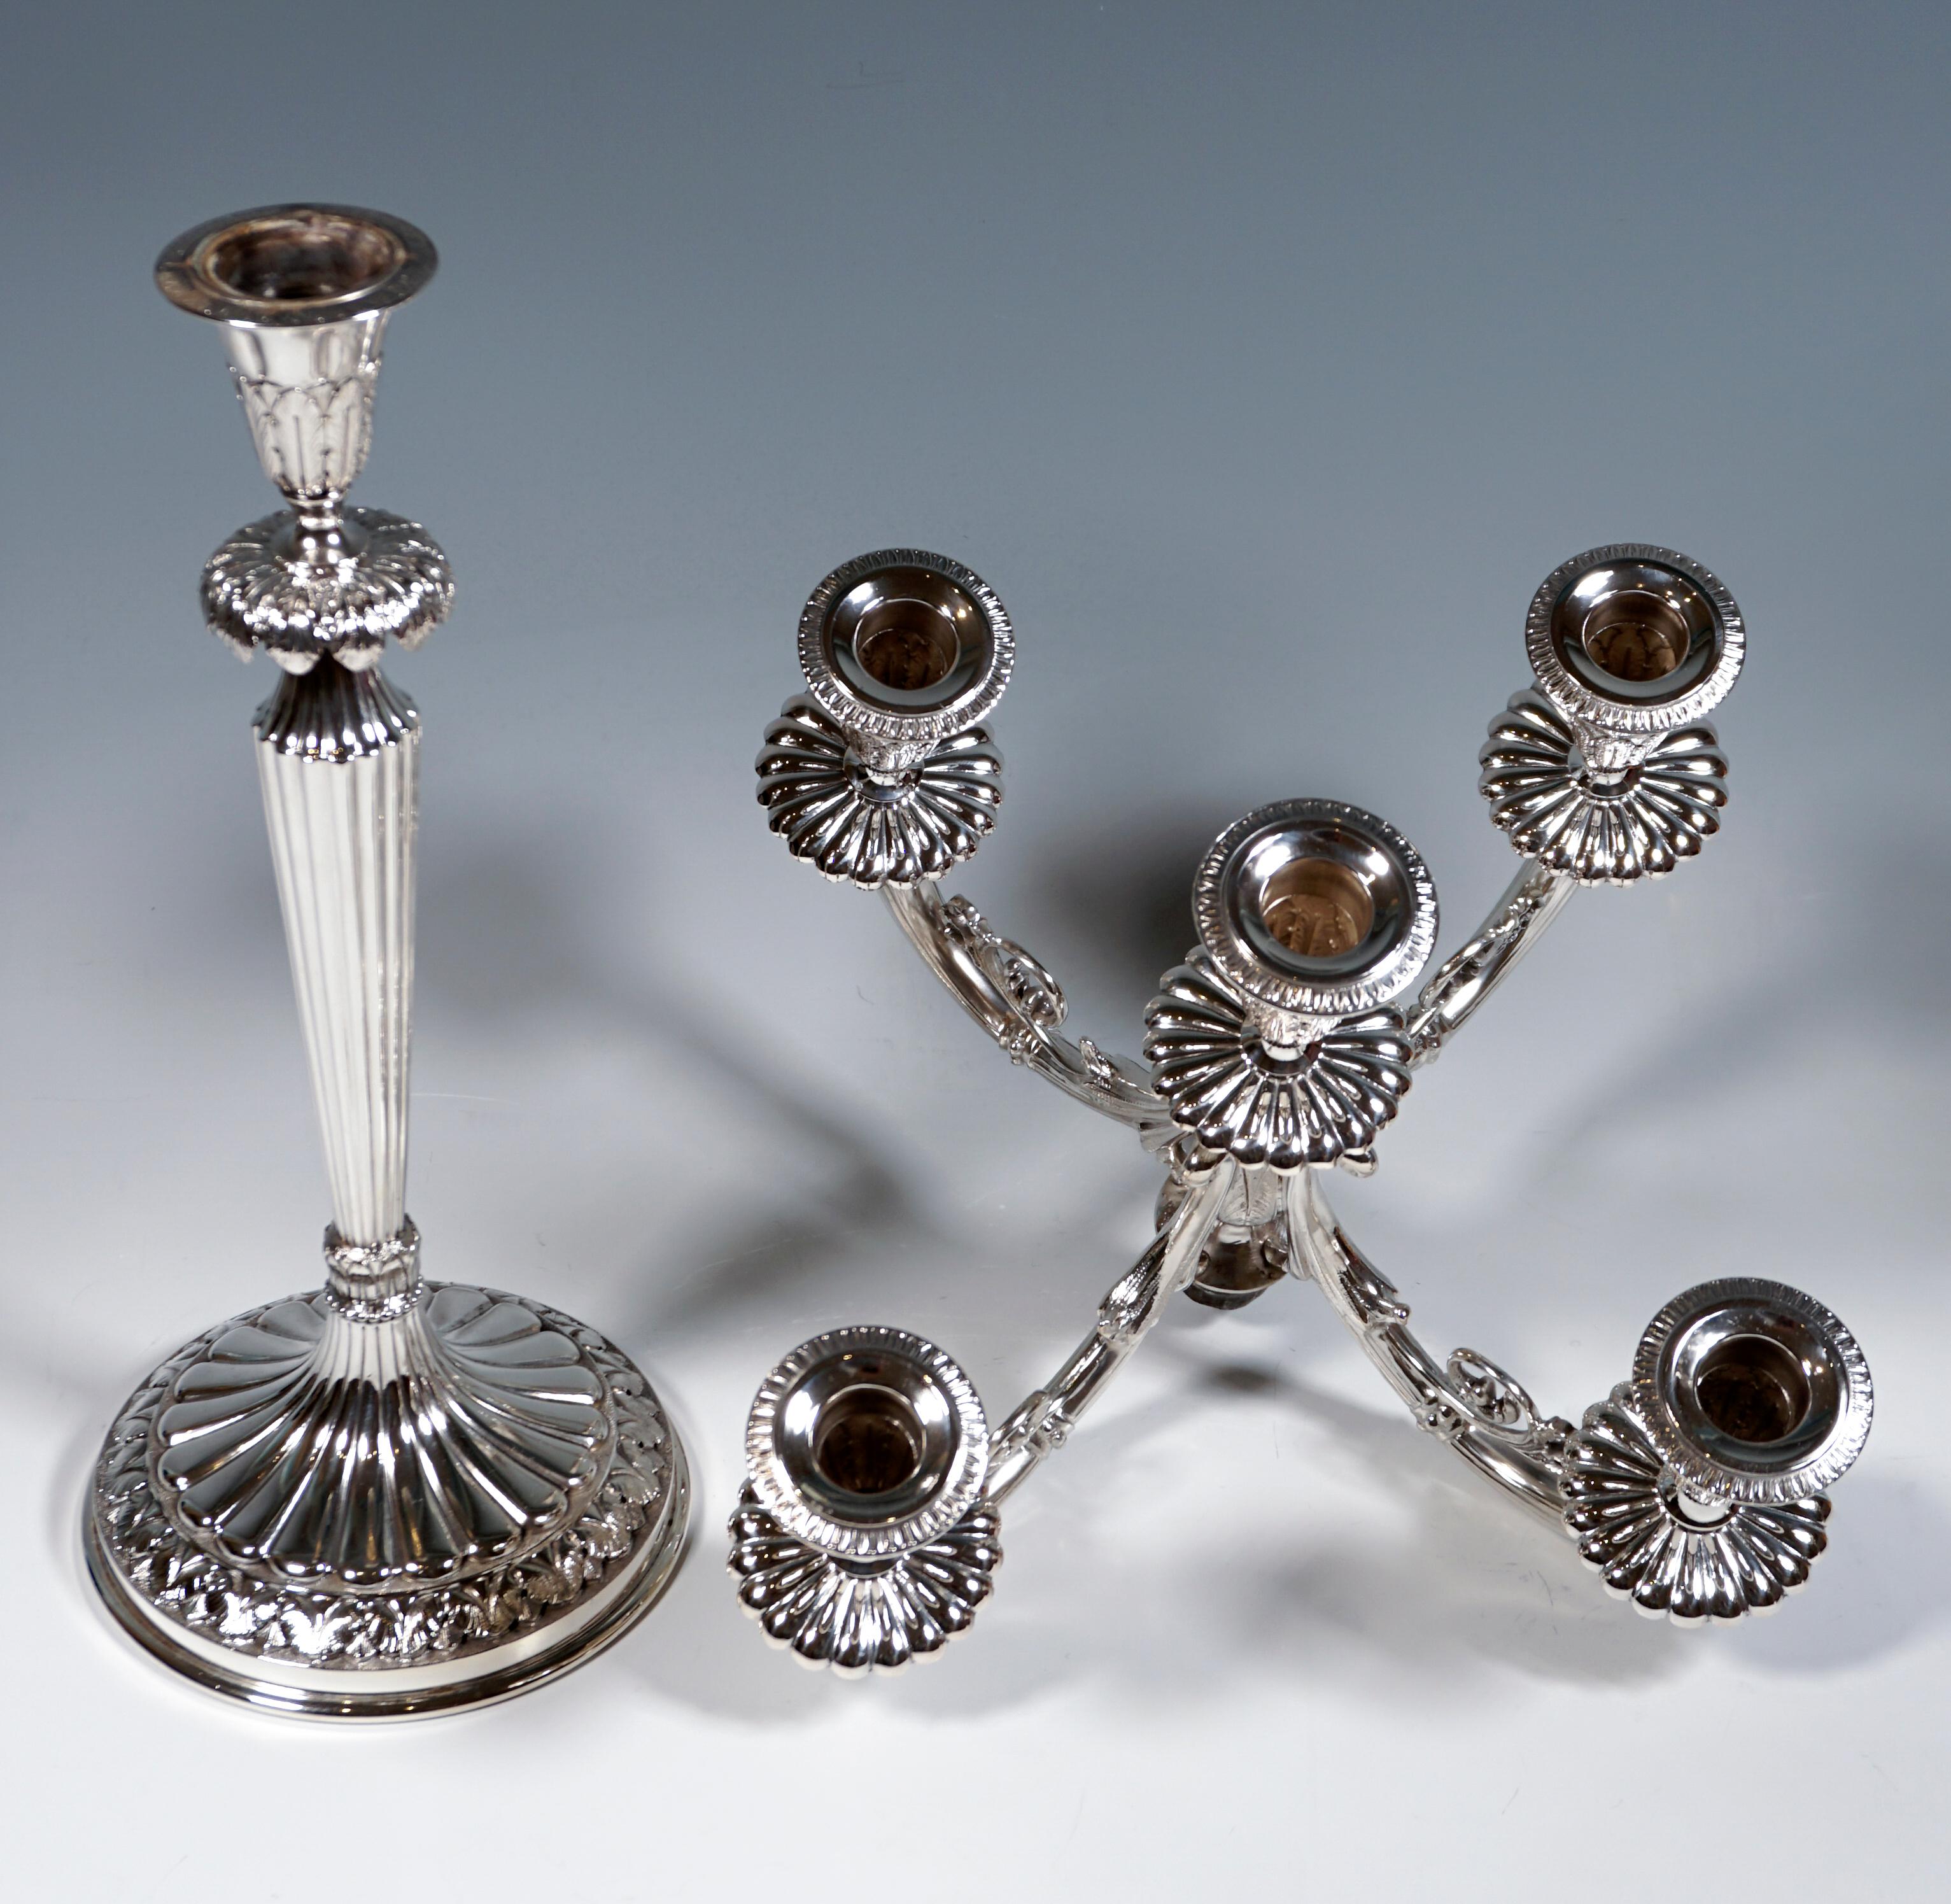 Hand-Crafted Pair of 5-Flame Silver Candelabras with Acanthus Decoration, Milan, Around 1950